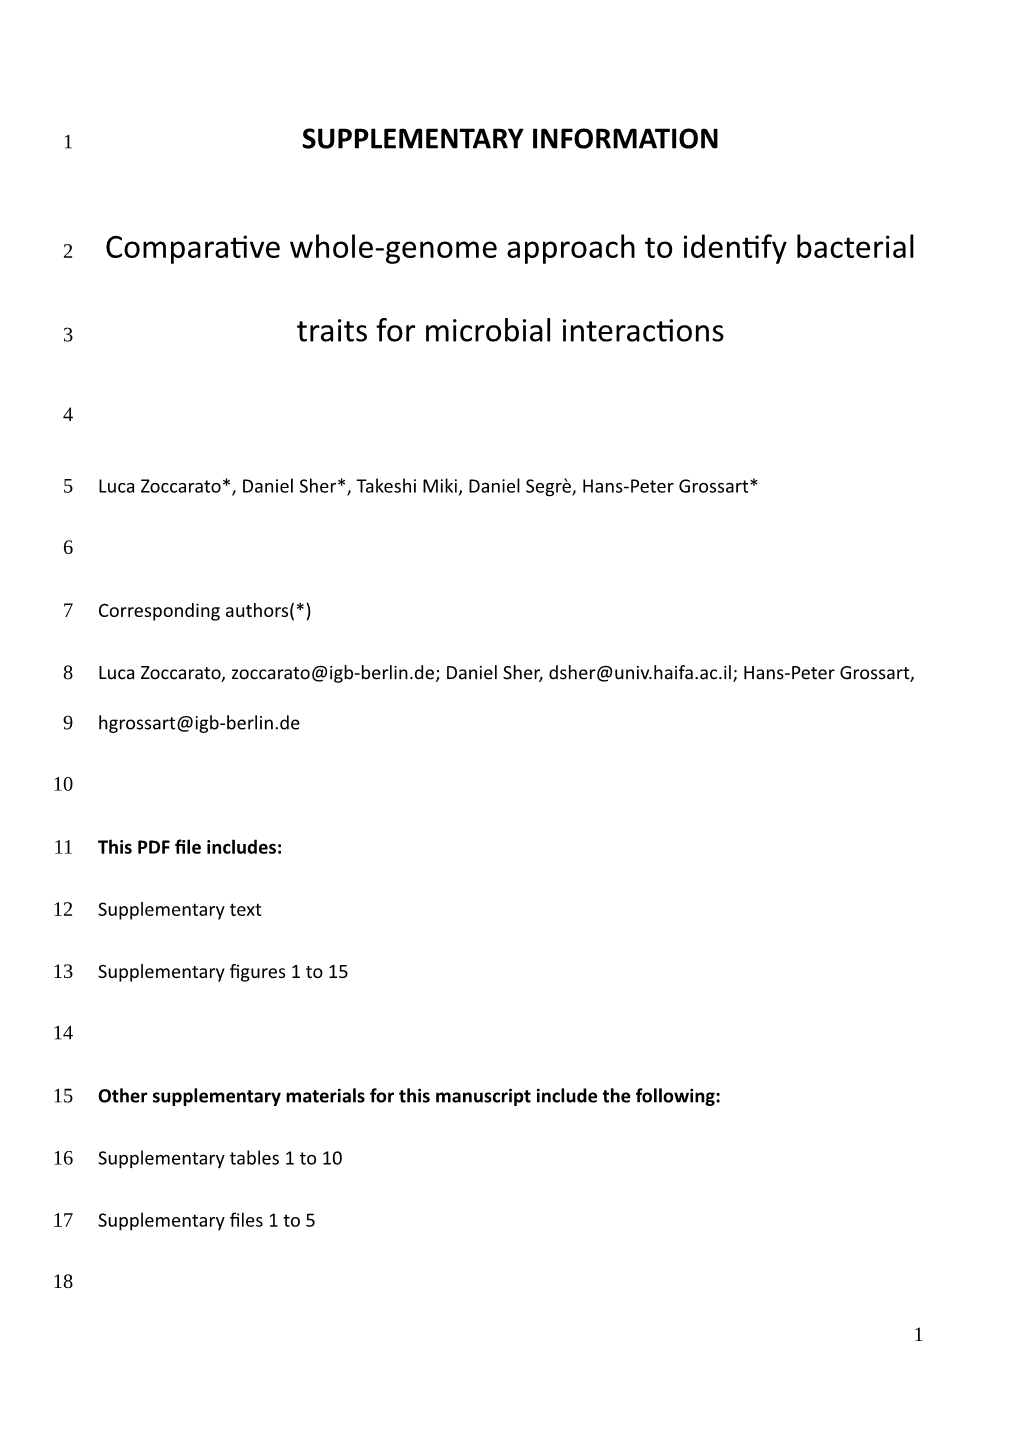 Comparative Whole-Genome Approach to Identify Bacterial Traits